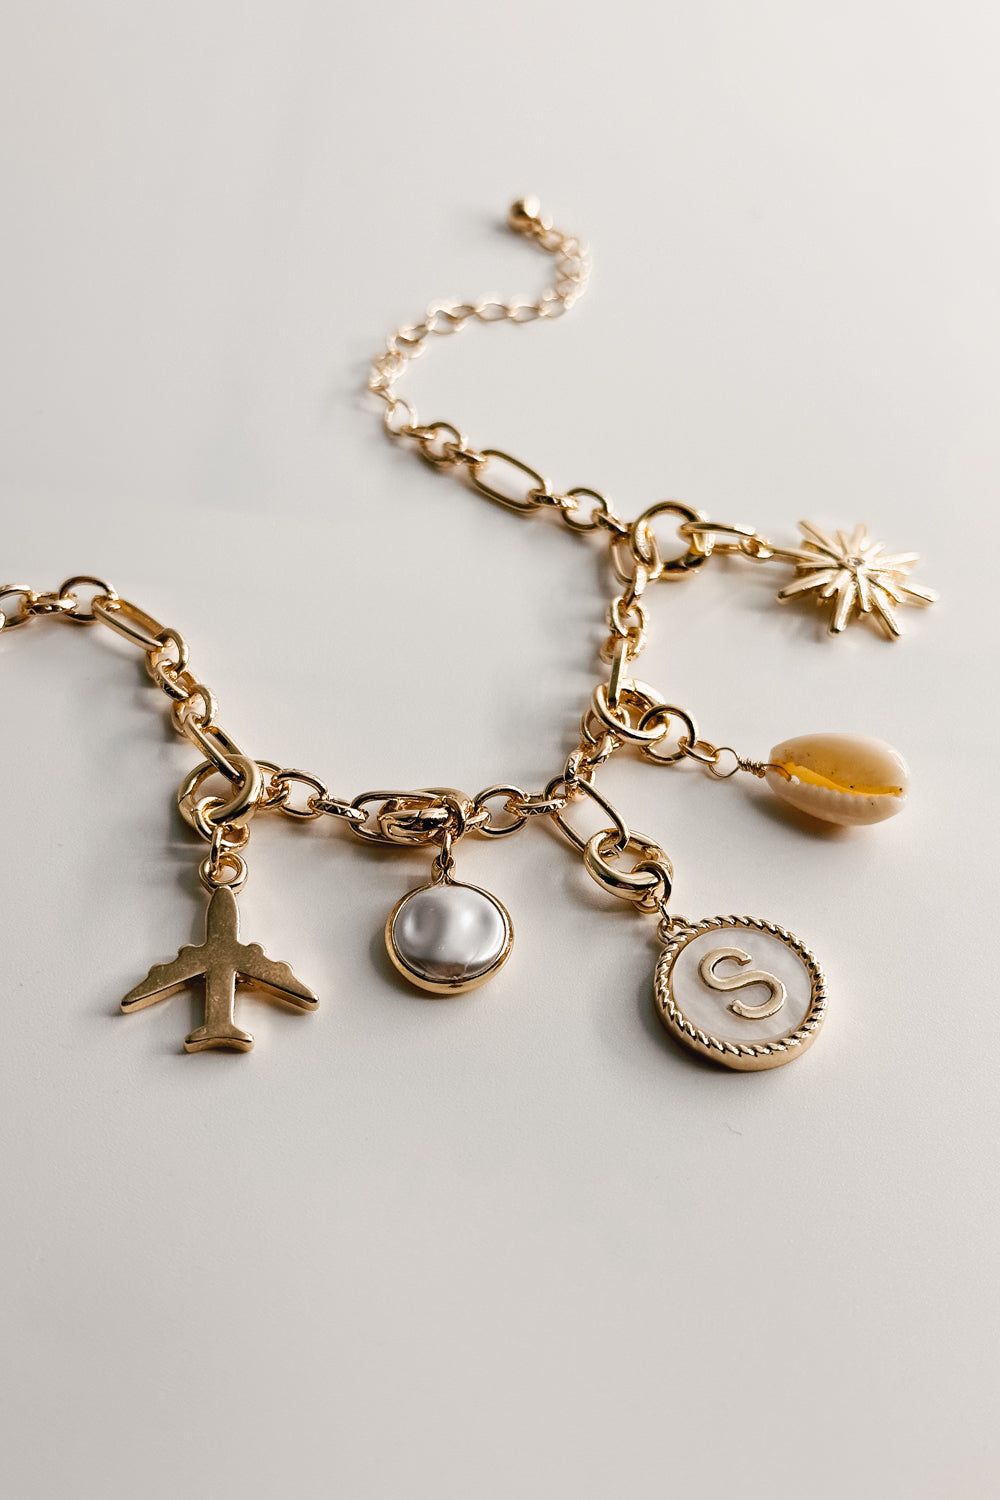 Image shows the Reagan Gold Chain Link Bracelet against a white background. Bracelet has gold circle and oval links. Shown with 5 assorted charms attached.